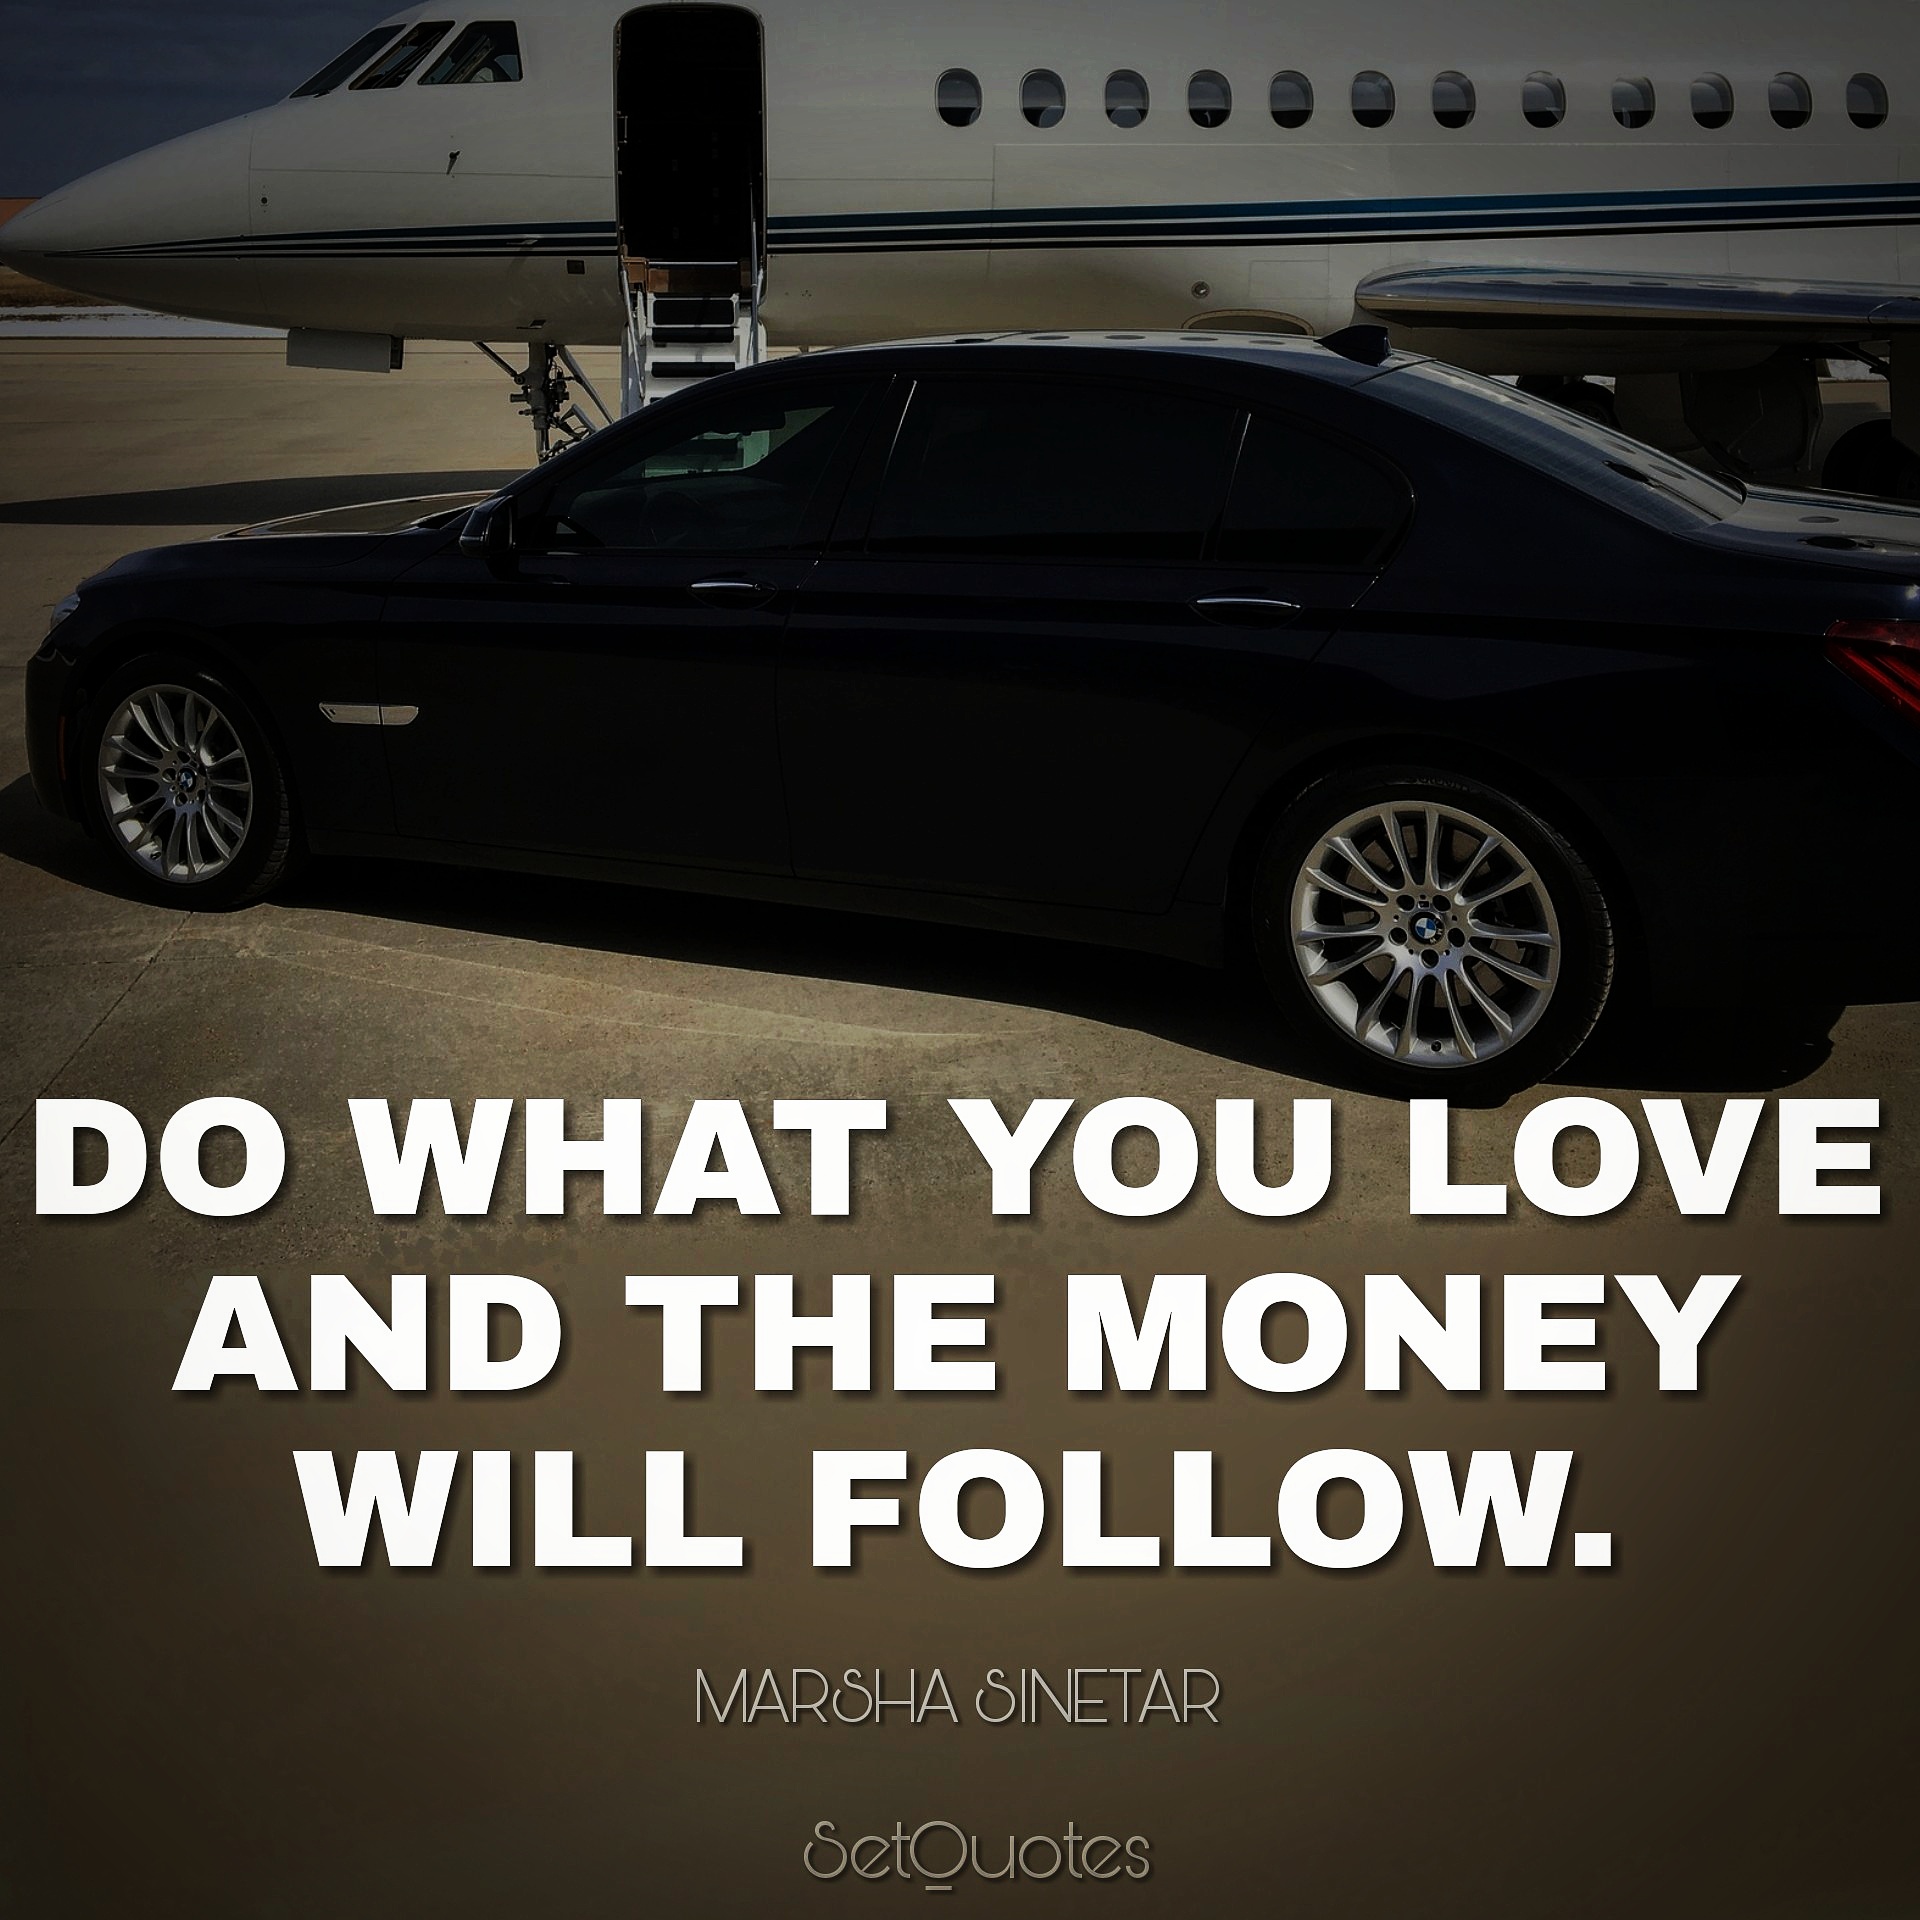 Do what you love and money will follow